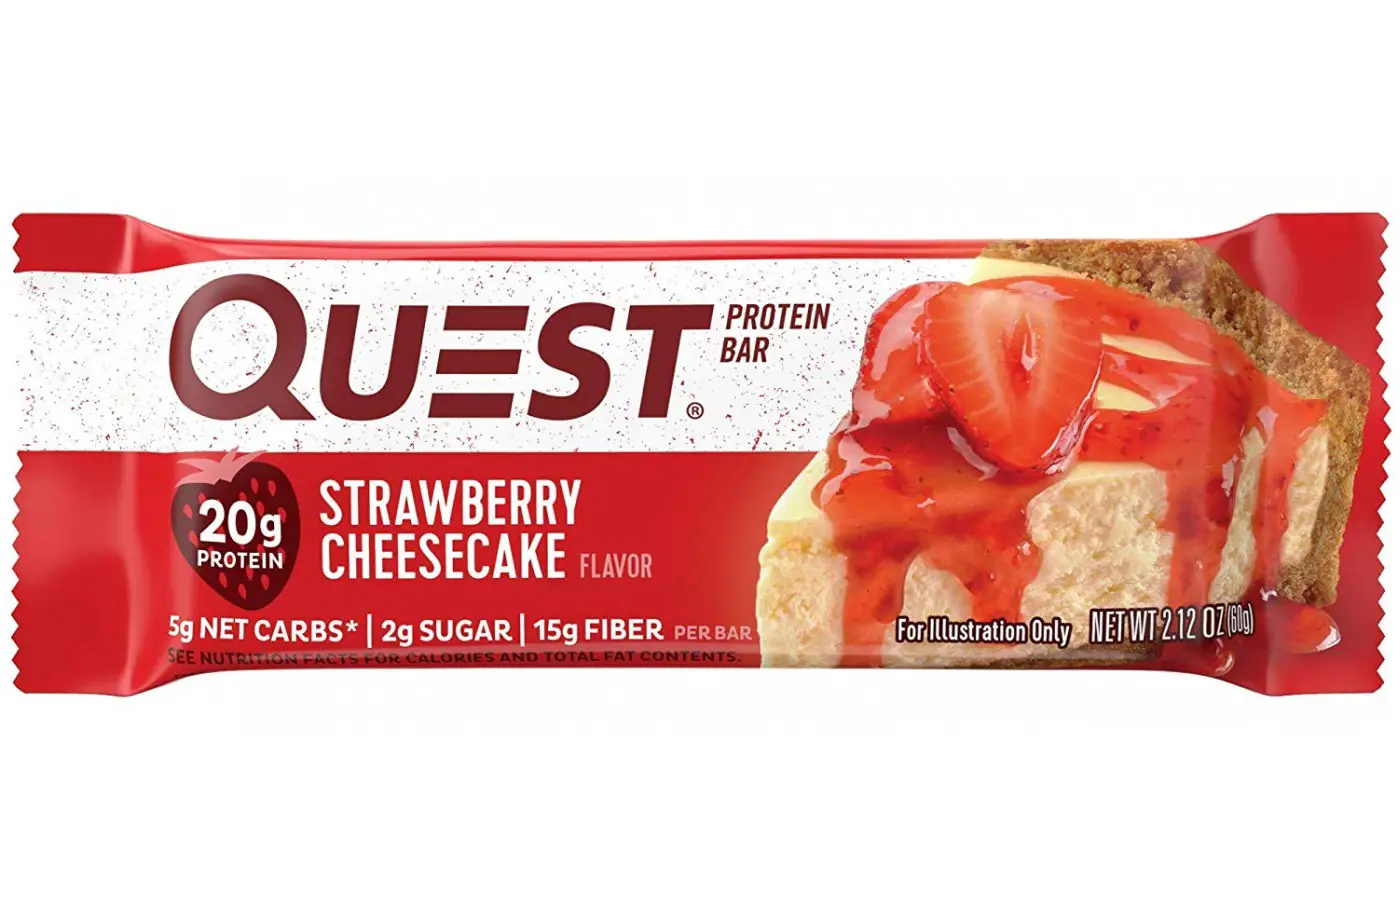 Quest Strawberry Cheesecake